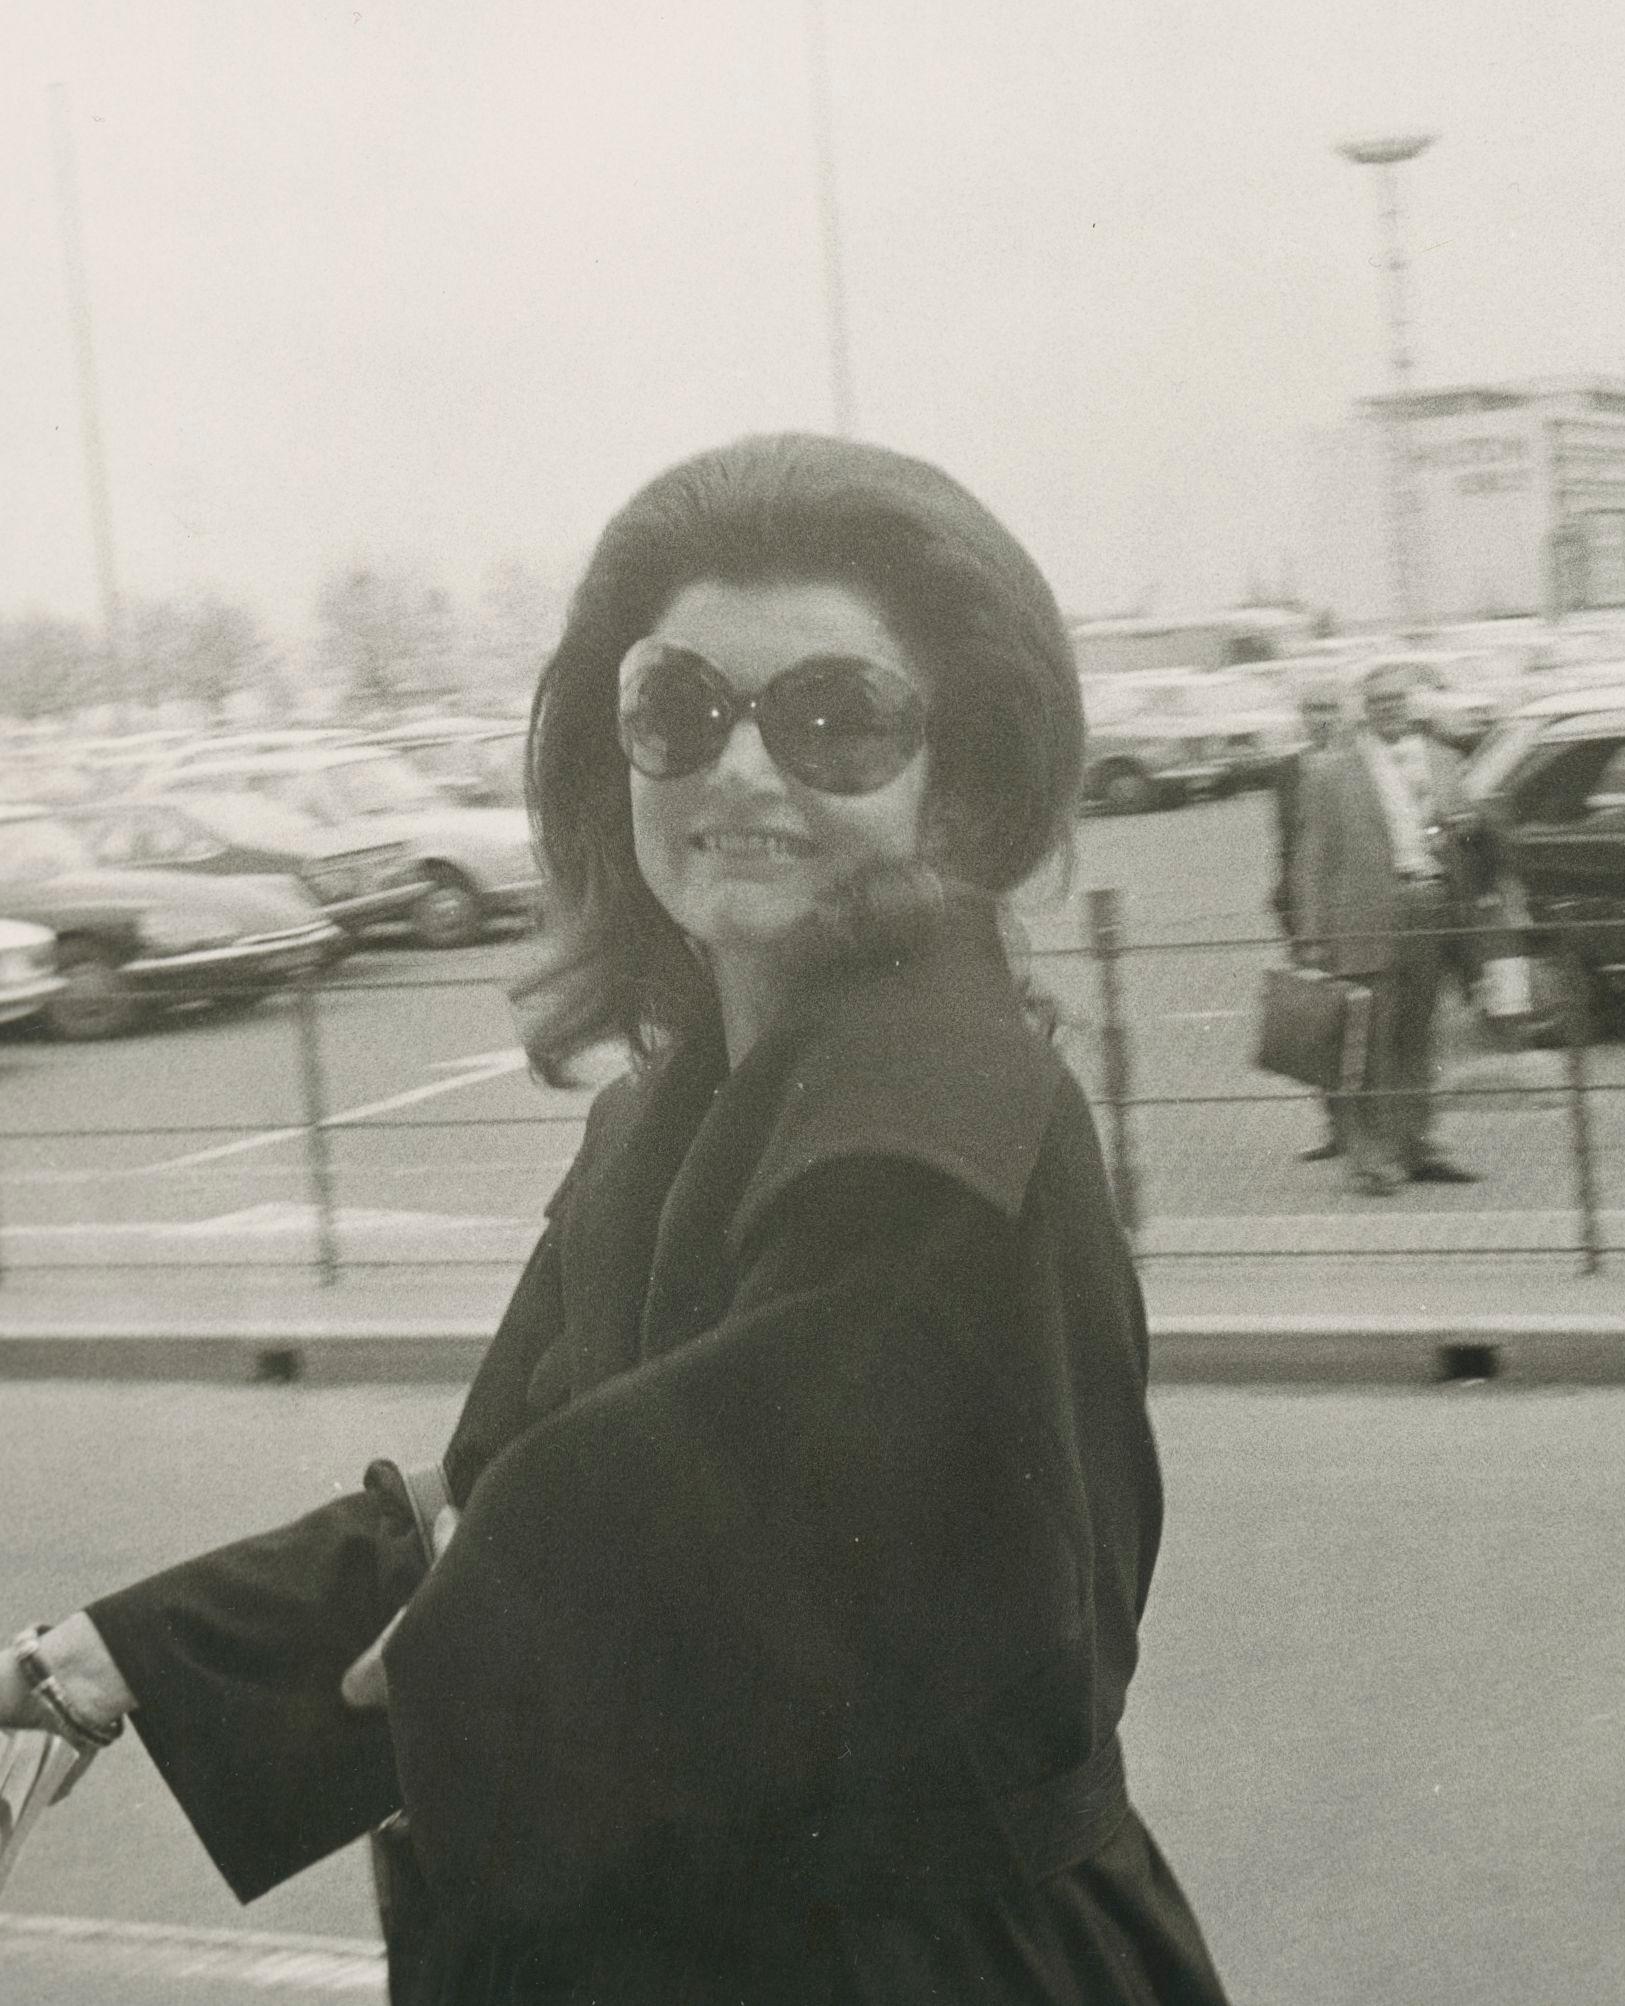 Jackie Kennedy Onassis, Black and White, Paris, 1950s, 30 x 20, 2 cm - Photograph by Jacques Alexandre